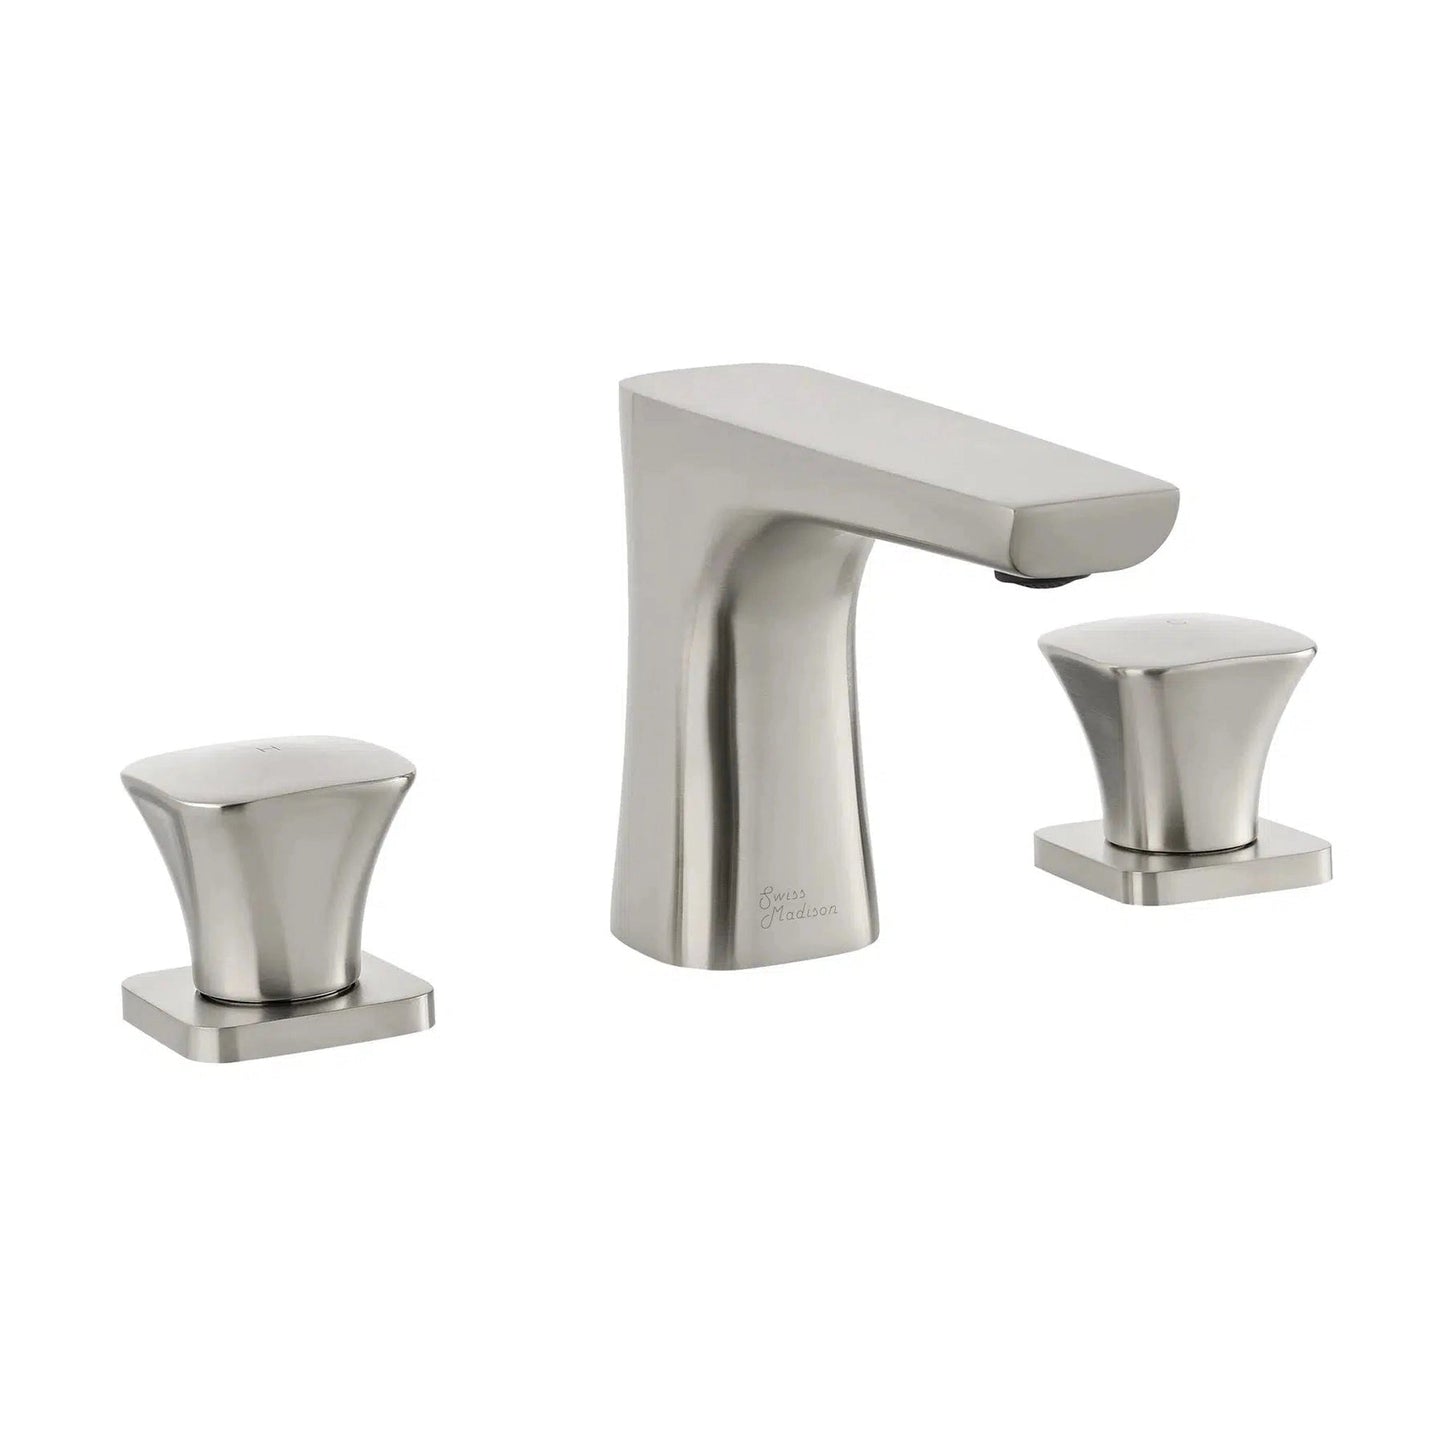 Swiss Madison Monaco 8" Brushed Nickel Widespread Bathroom Faucet With Knob Handles and 1.2 GPM Flow Rate